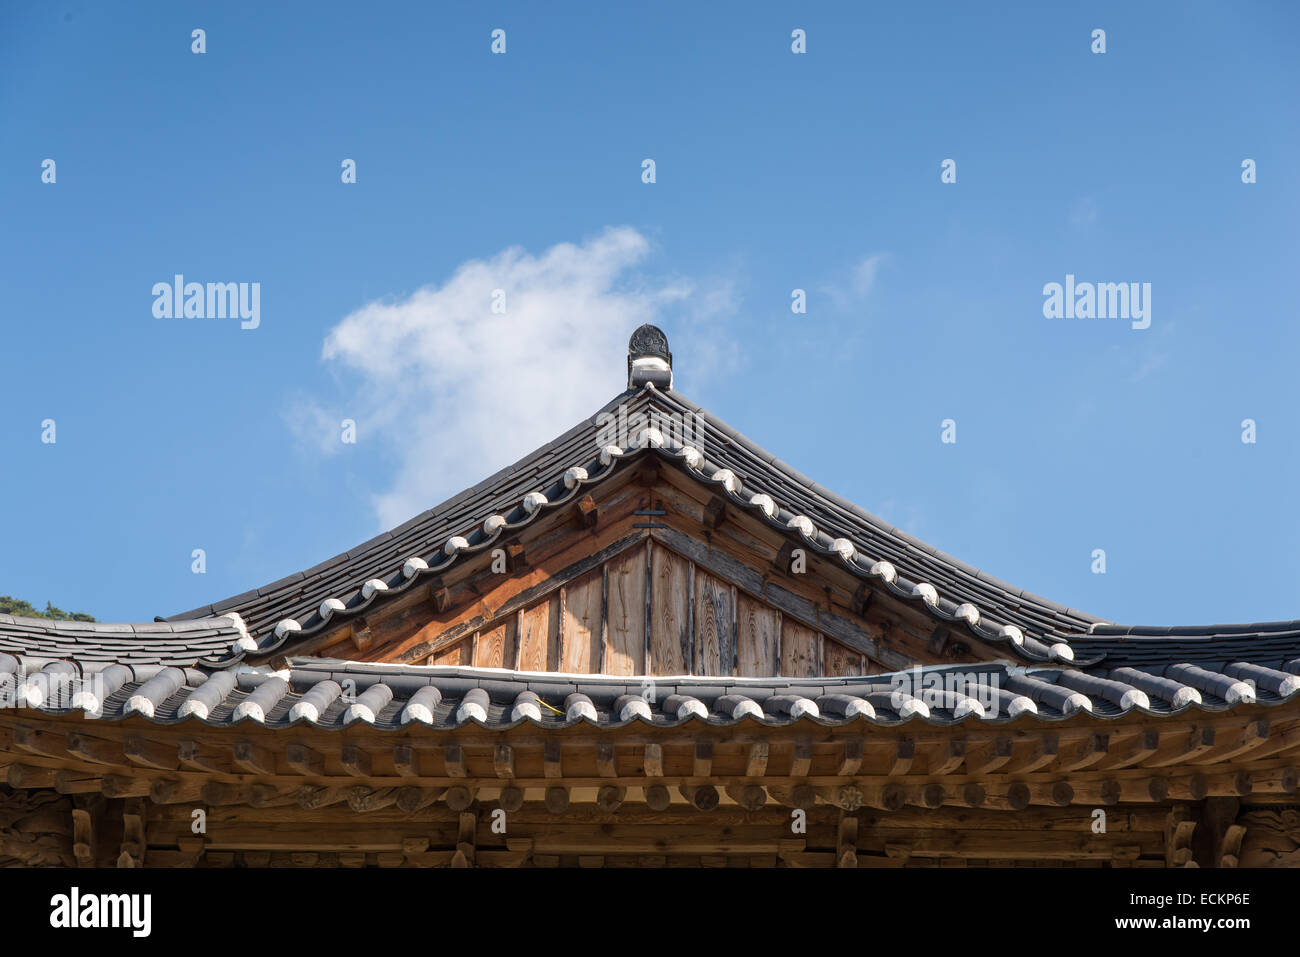 tiled roof of Korean traditional Architecture with clear sky Stock Photo